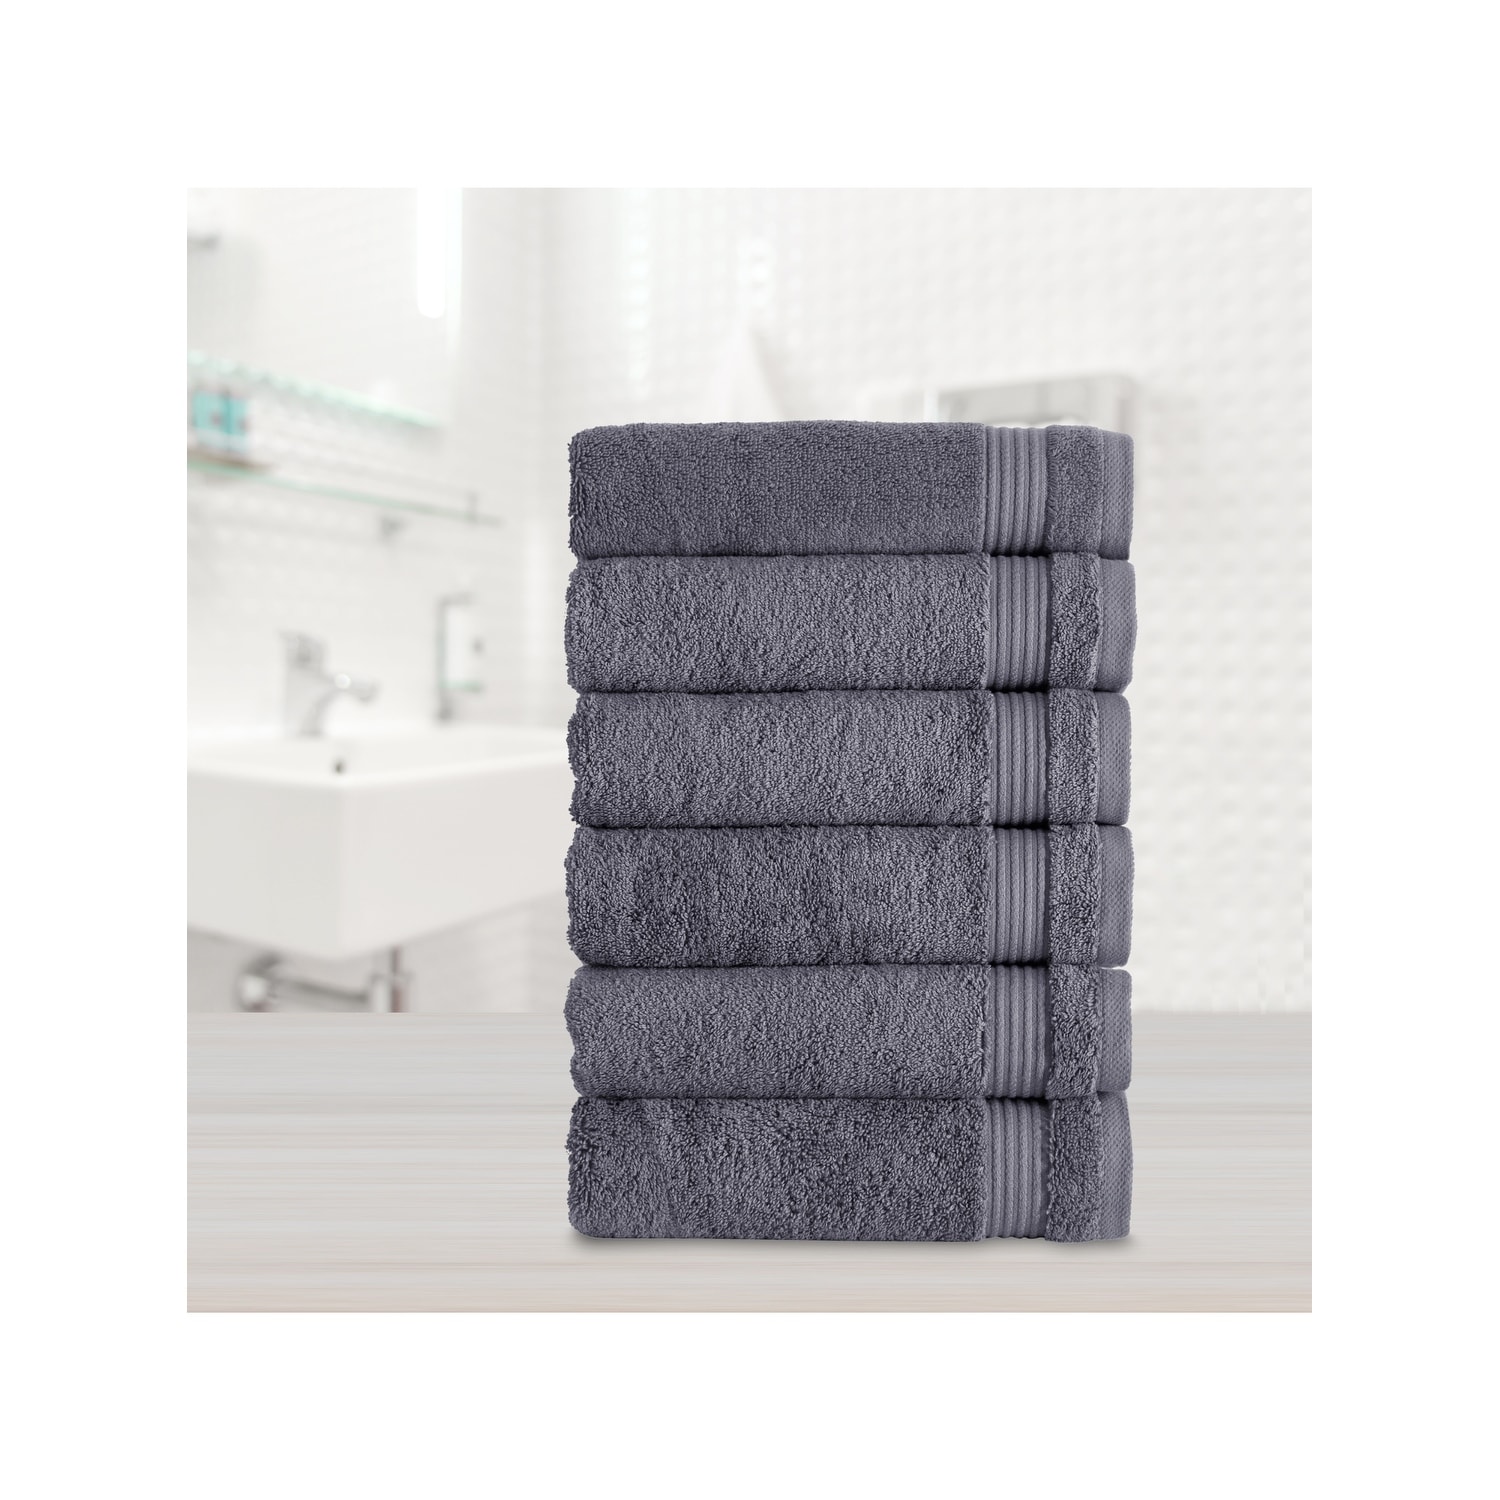 https://ak1.ostkcdn.com/images/products/is/images/direct/082f6fc87ef3158fc4a9e18d4cab64433be10ba4/Classic-Turkish-Towels-Amadeus-Hand-Towel-16x27.jpg